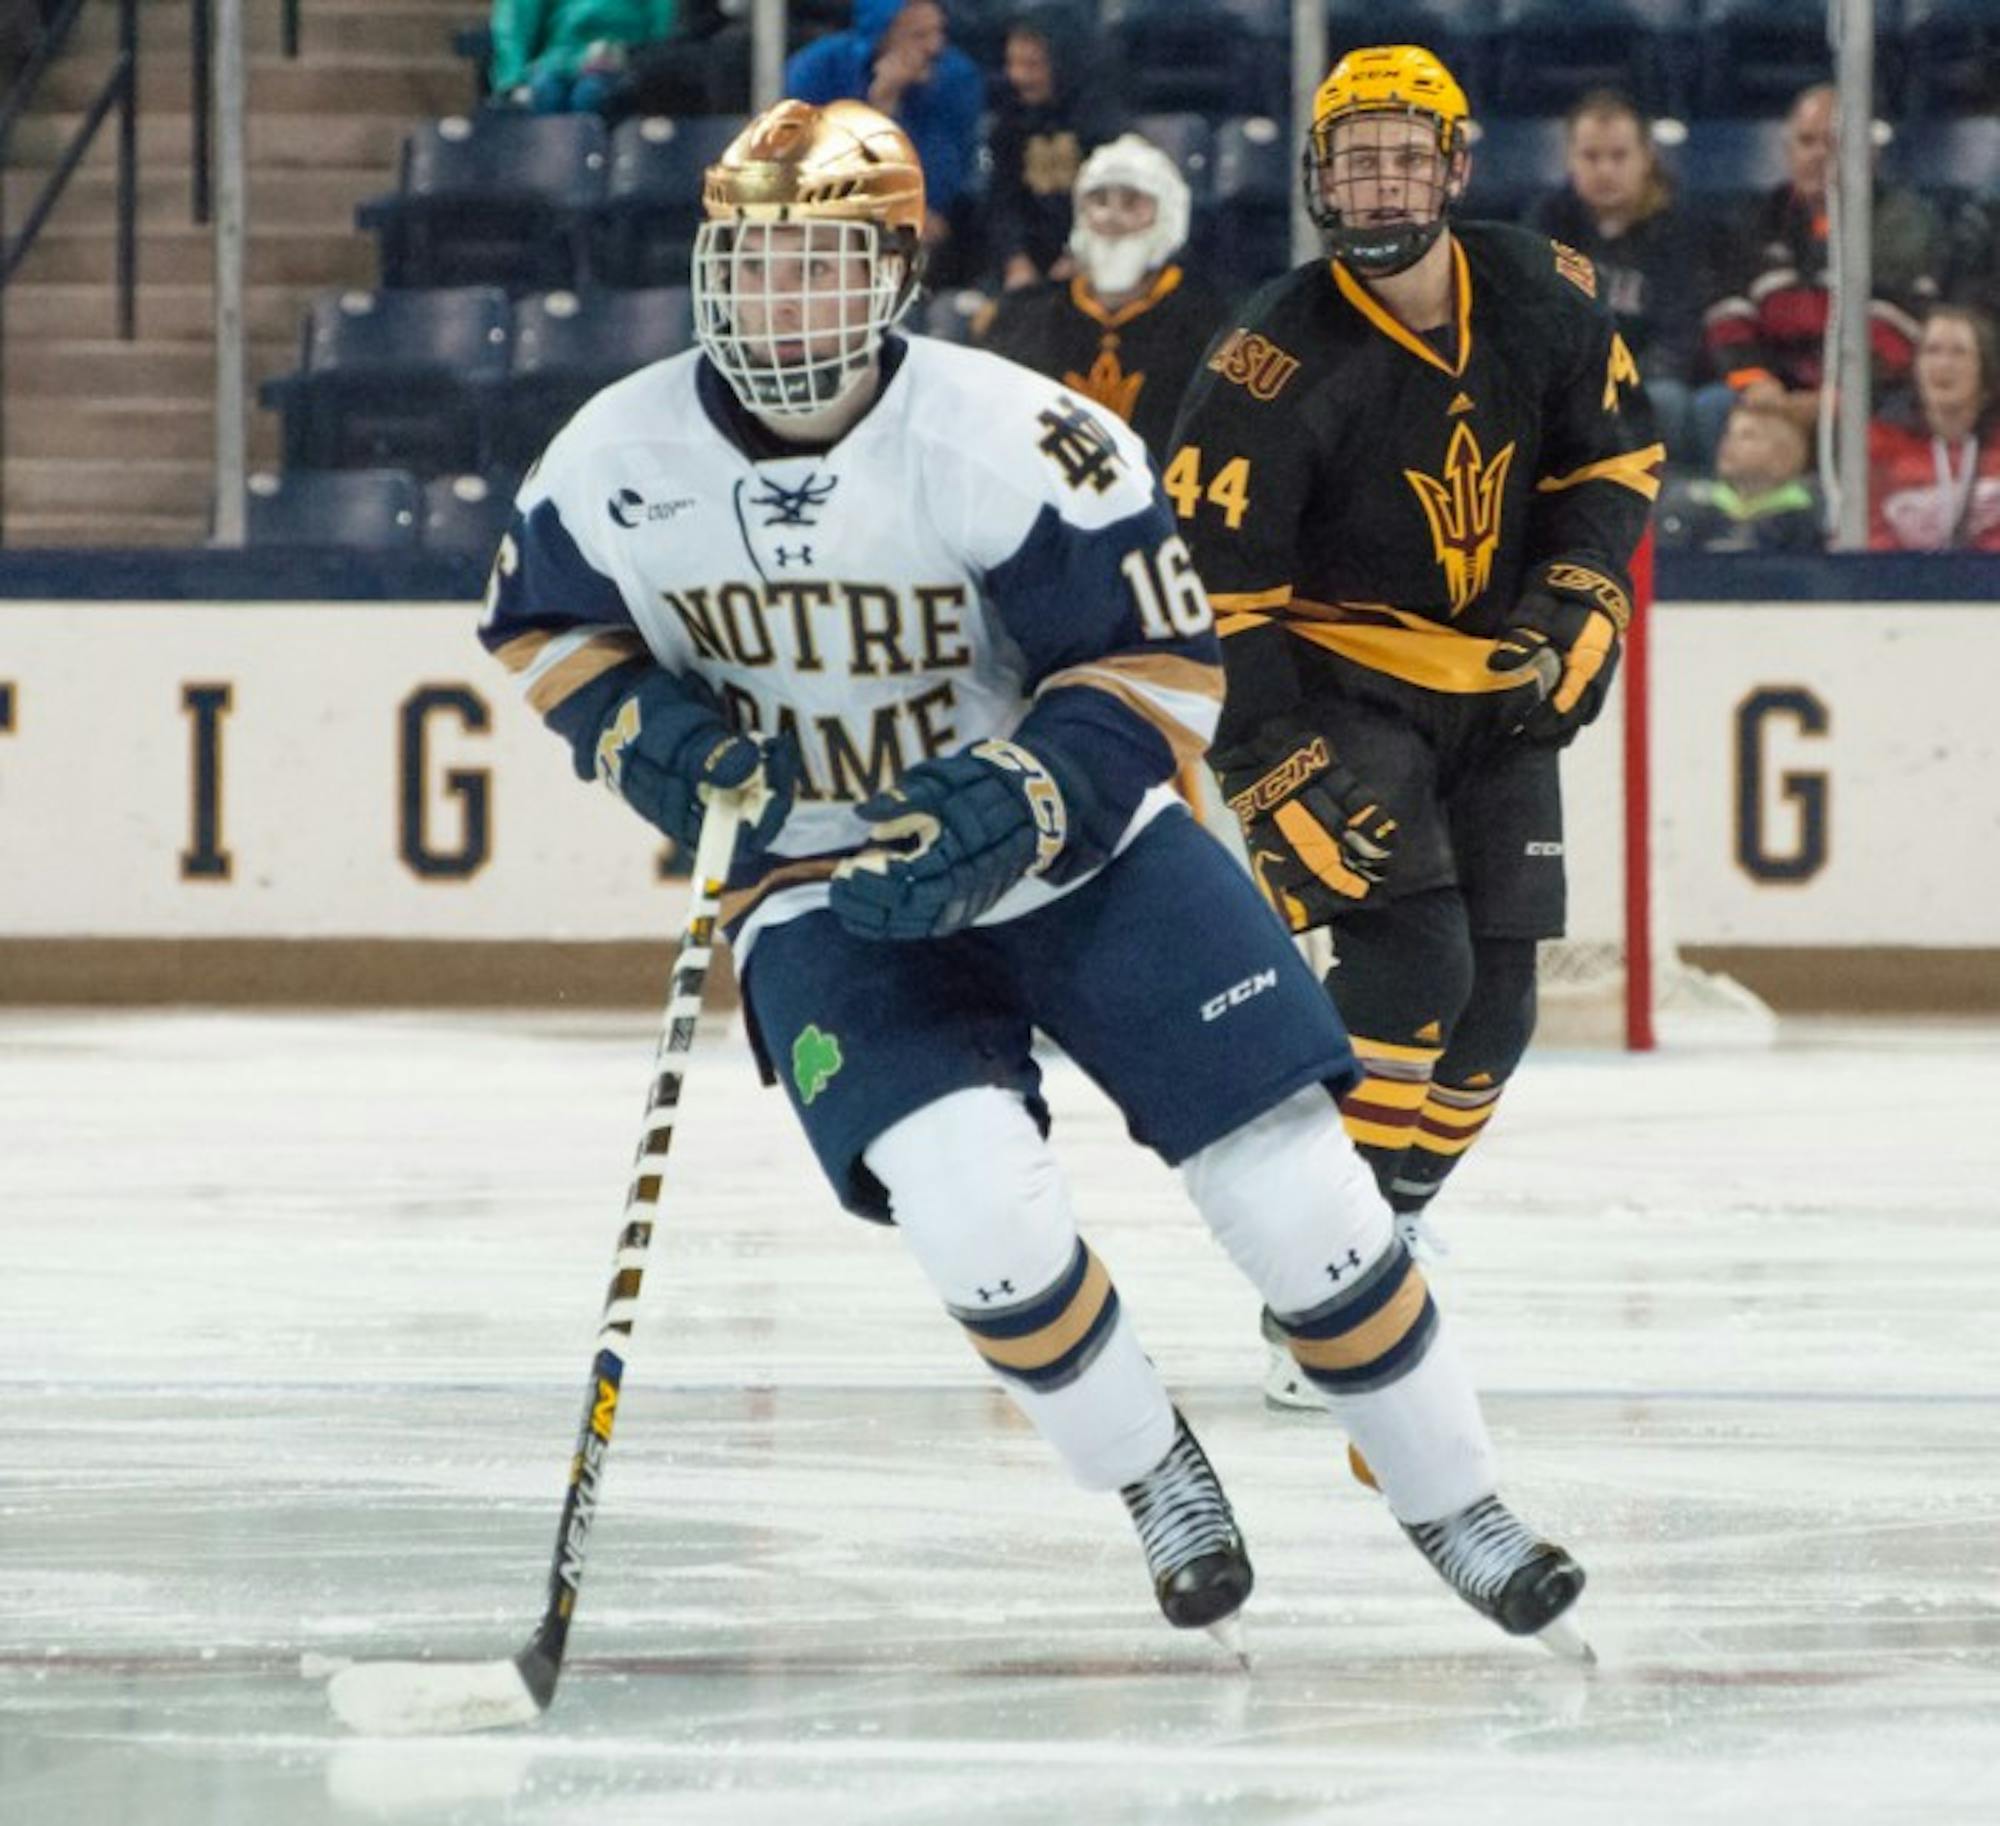 Irish junior forward Connor Hurley skates up the ice in Notre Dame's 4-2 victory over Arizona State.